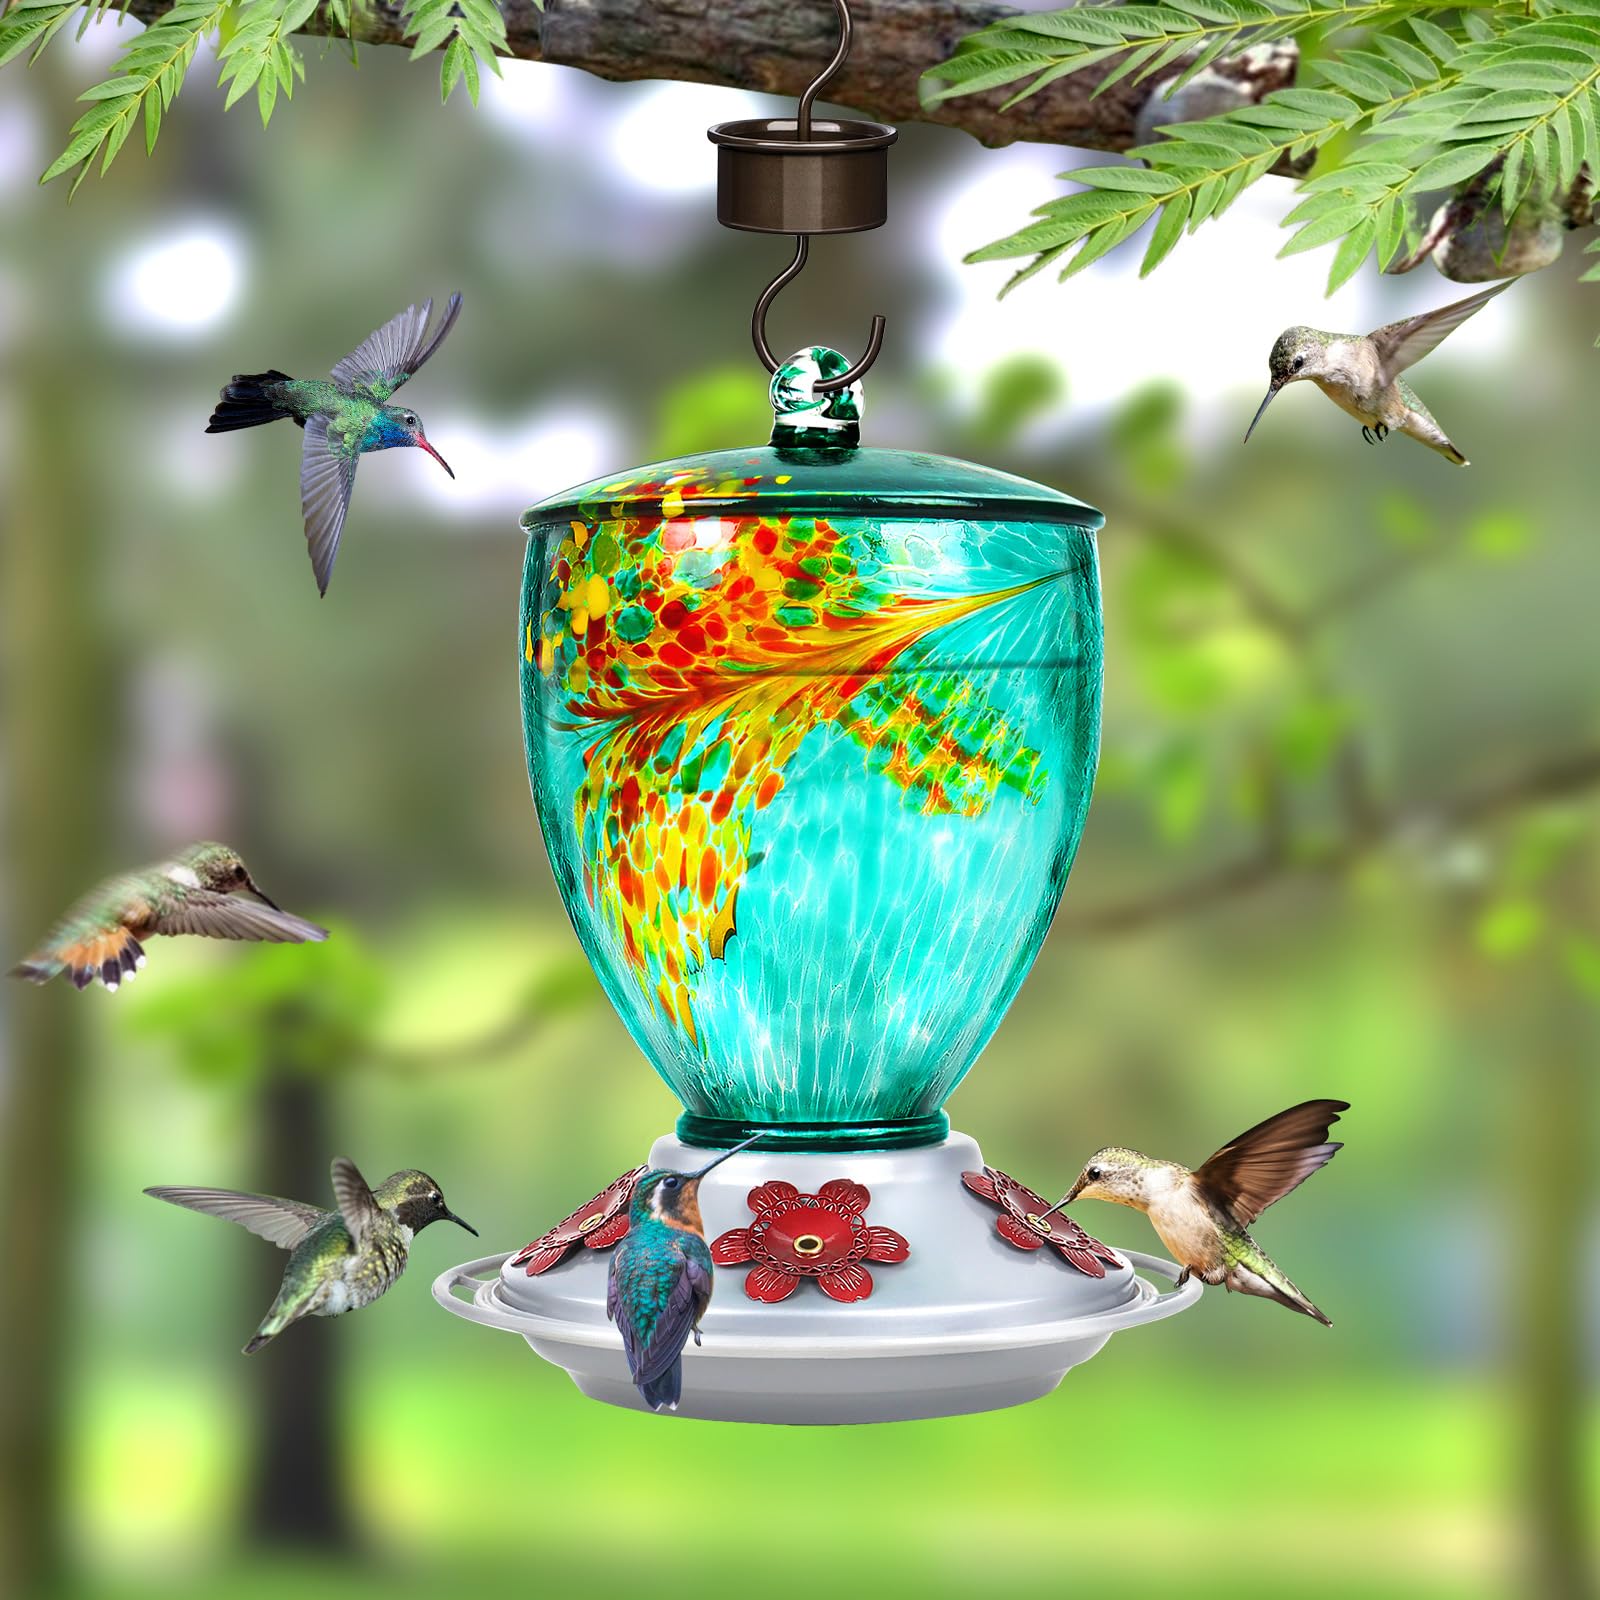 BOLITE Hummingbird Feeders for Outdoors, Hand Blown Glass, 30 Ounce, 5 Feeding Ports with Perch, 21003BU Green